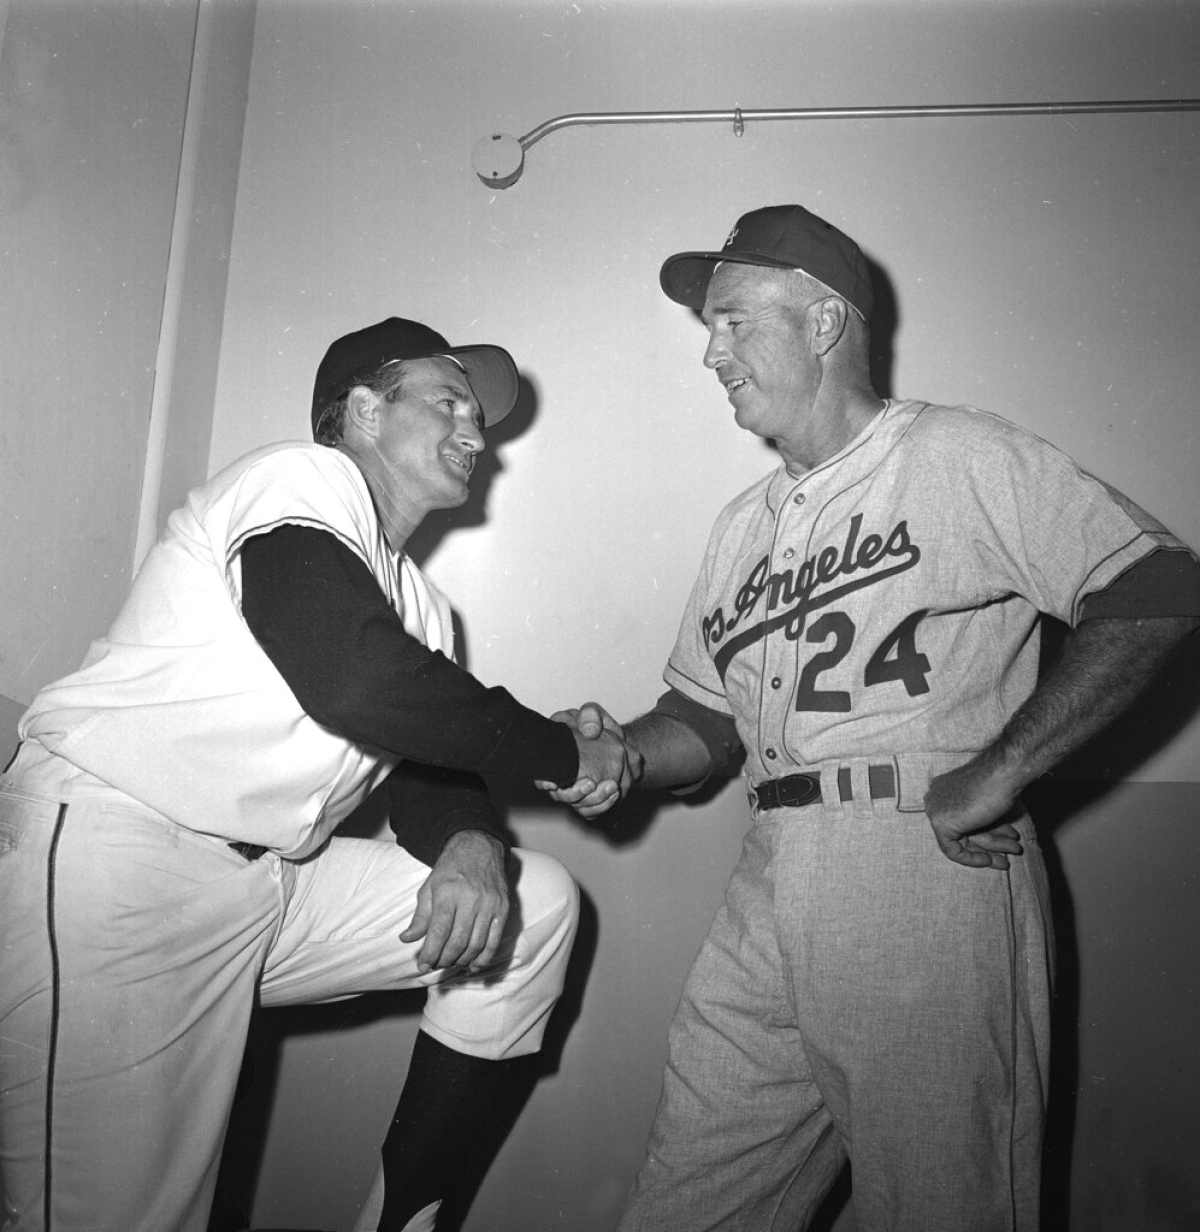 Giants manager Alvin Dark, left, and Dodgers manager Walter Alston shake hands.